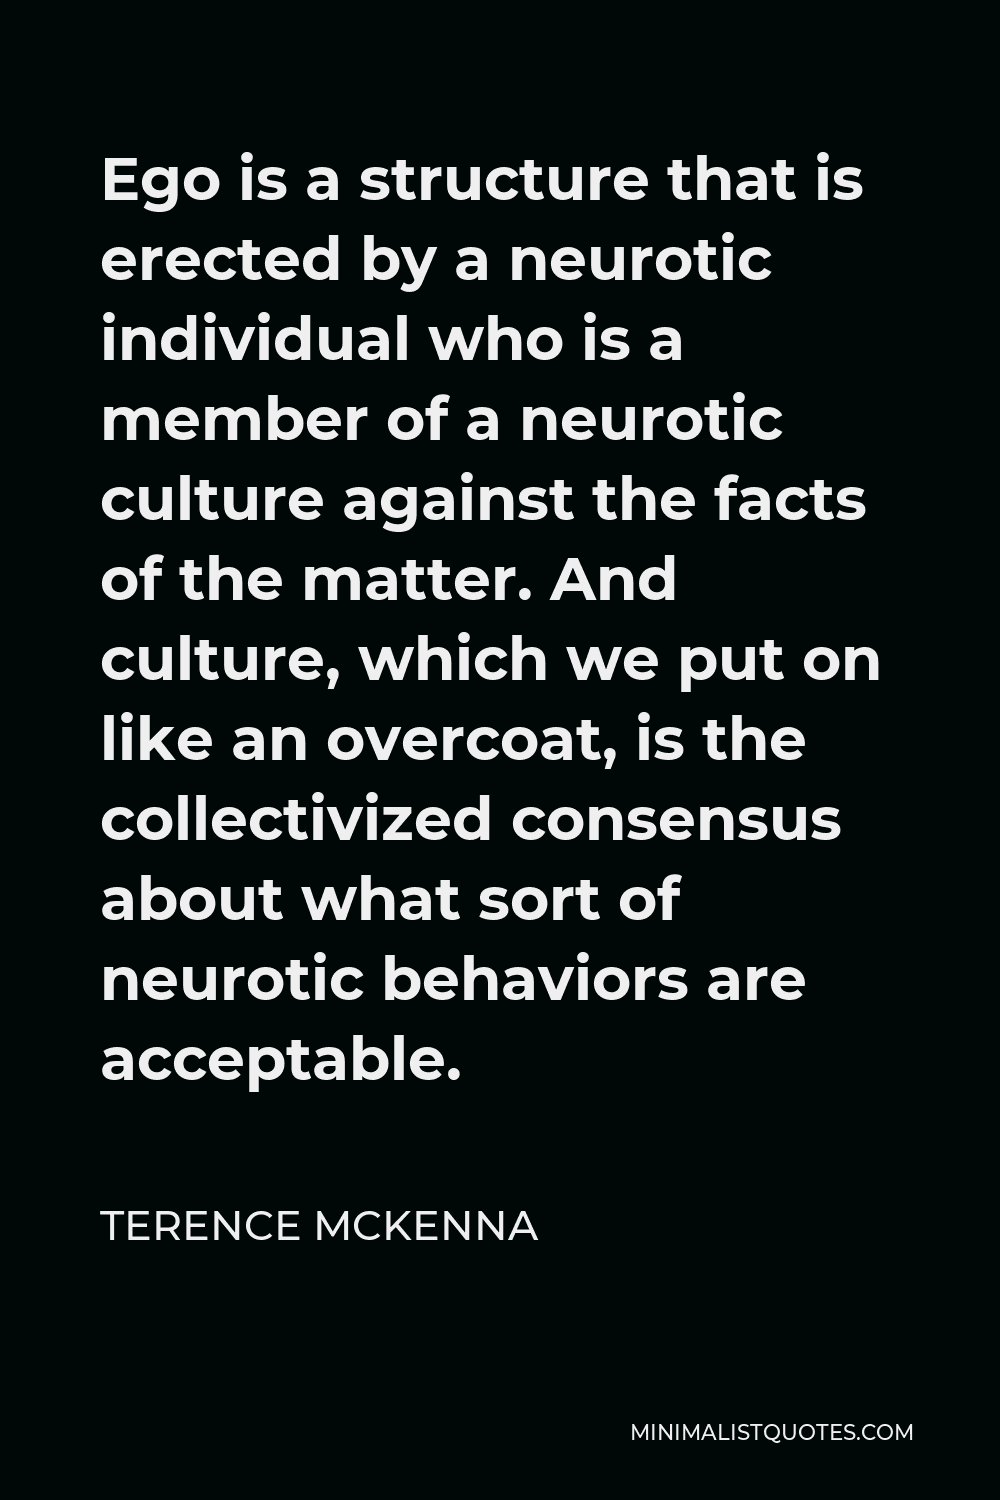 Terence McKenna Quote - Ego is a structure that is erected by a neurotic individual who is a member of a neurotic culture against the facts of the matter. And culture, which we put on like an overcoat, is the collectivized consensus about what sort of neurotic behaviors are acceptable.